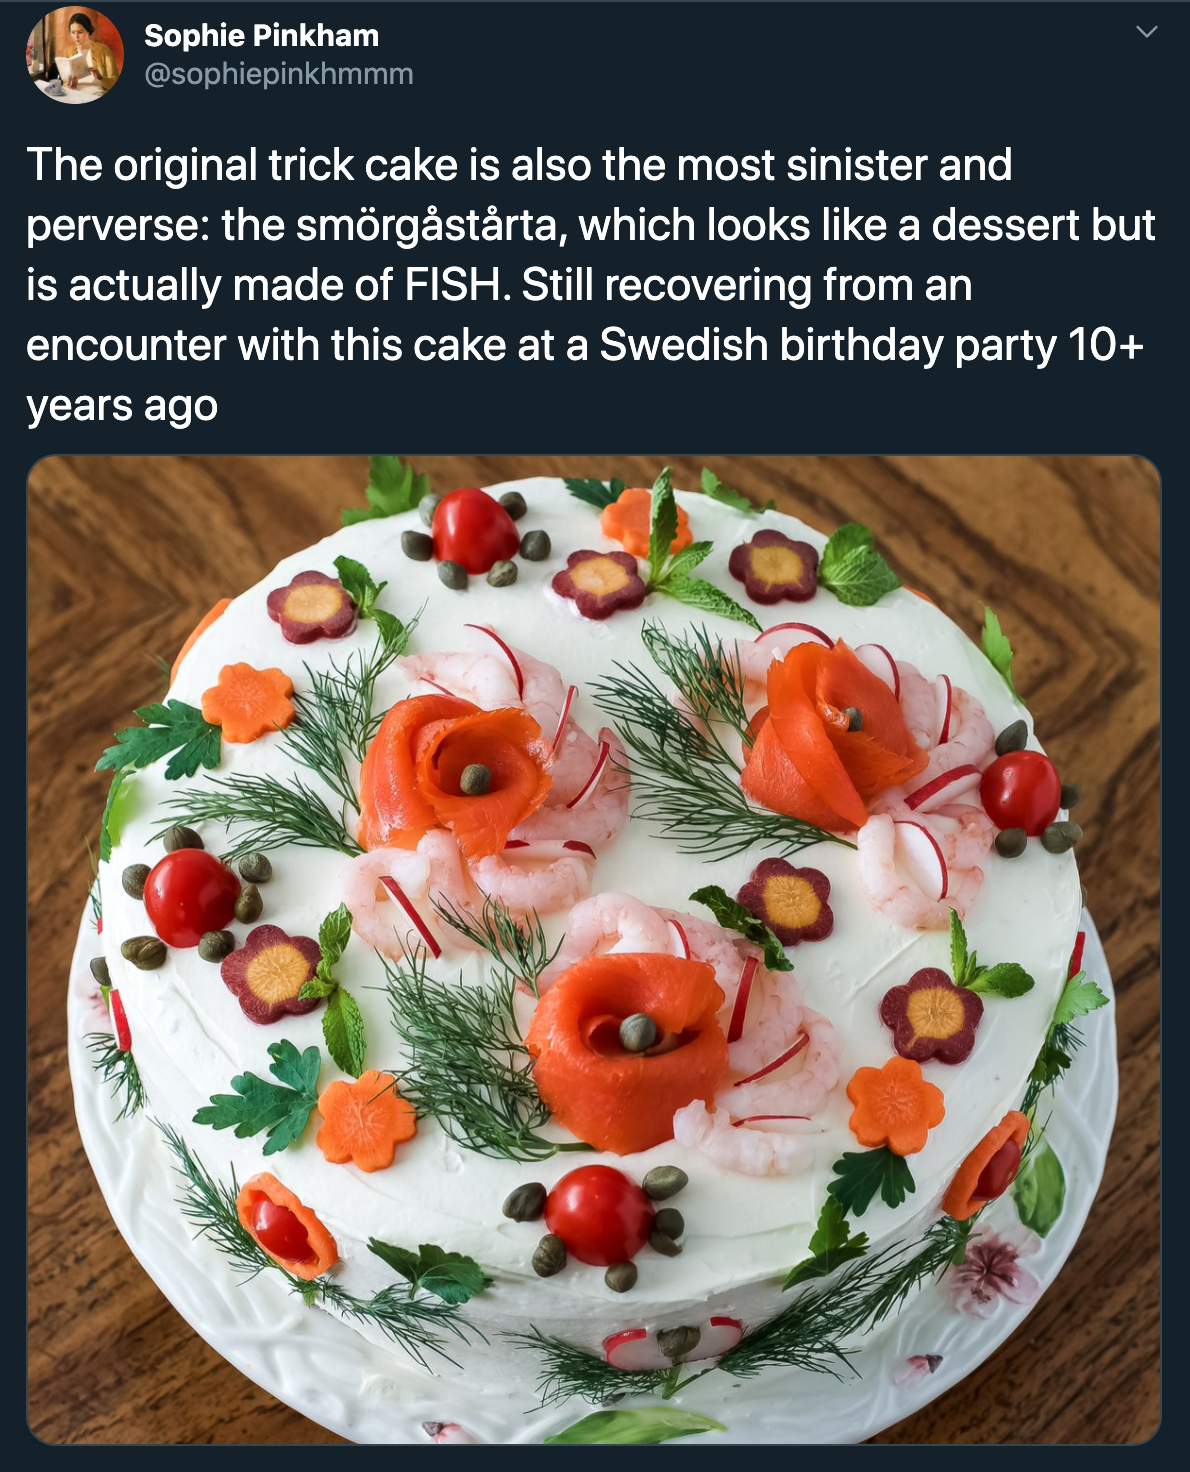 Cake - Sophie Pinkham The original trick cake is also the most sinister and perverse the smrgstrta, which looks a dessert but is actually made of Fish. Still recovering from an encounter with this cake at a Swedish birthday party 10 years ago